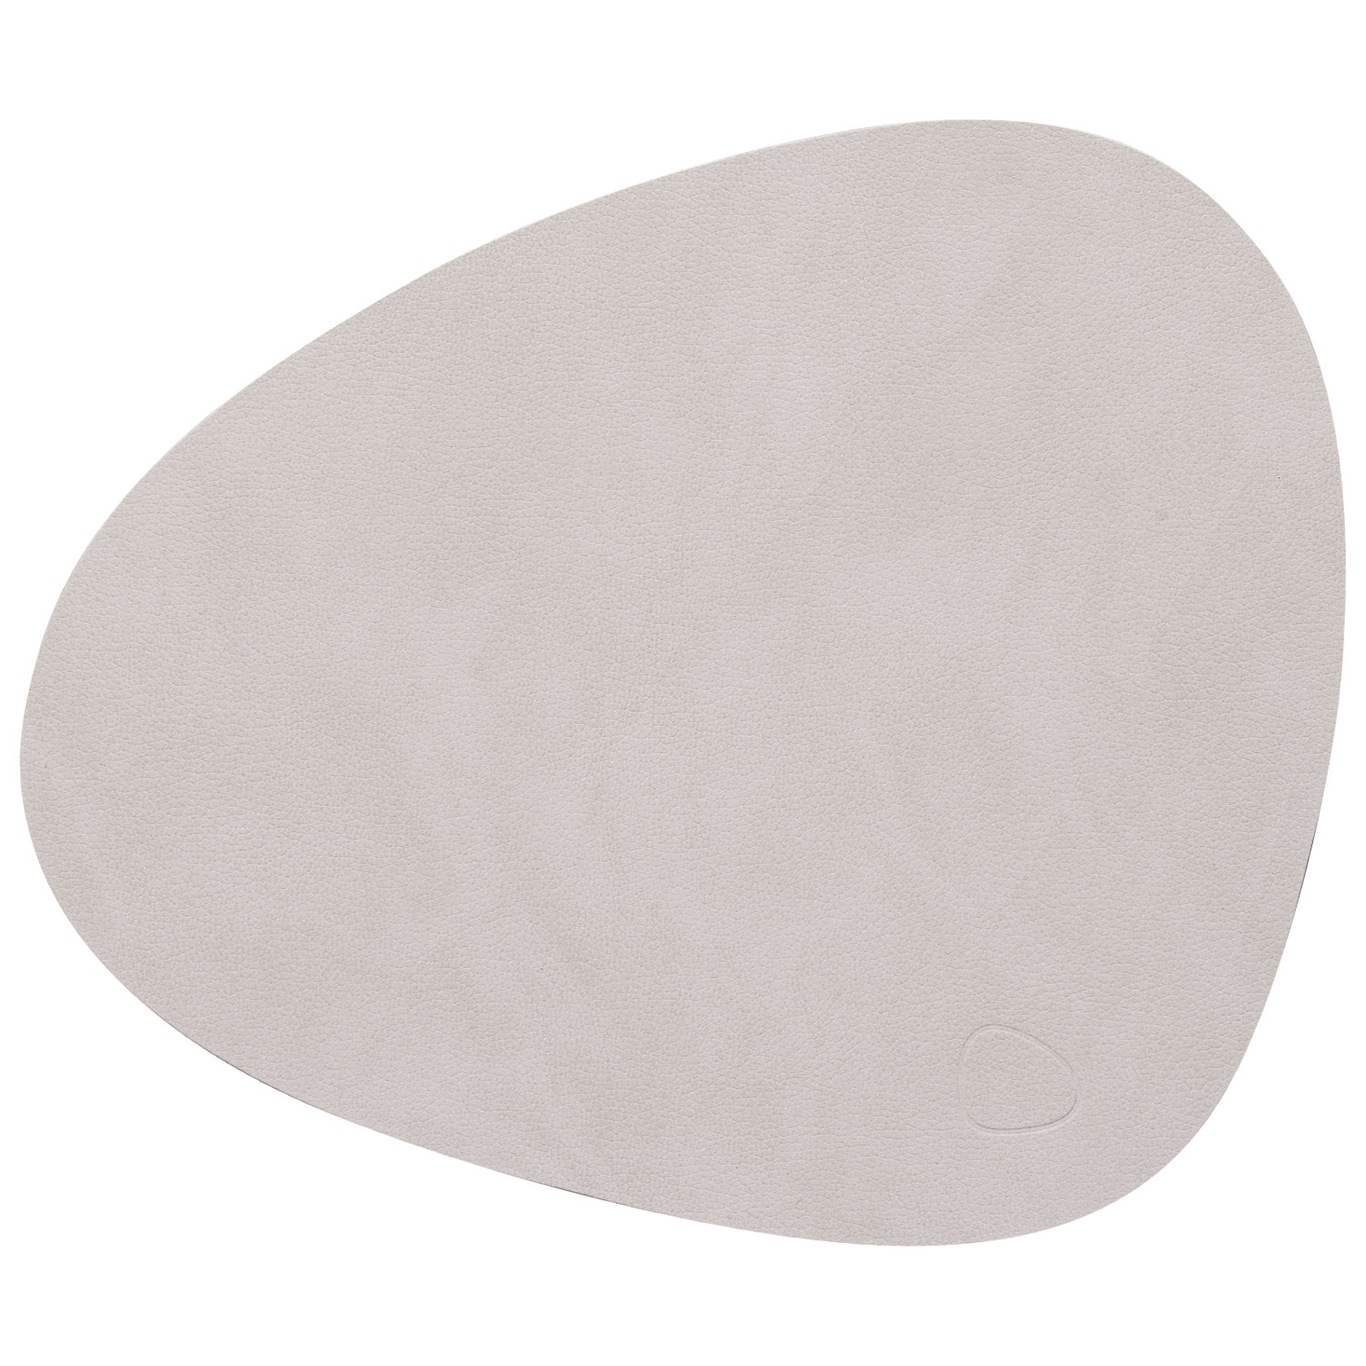 Curve Placemat Nupo 24x28 cm, Oyster White